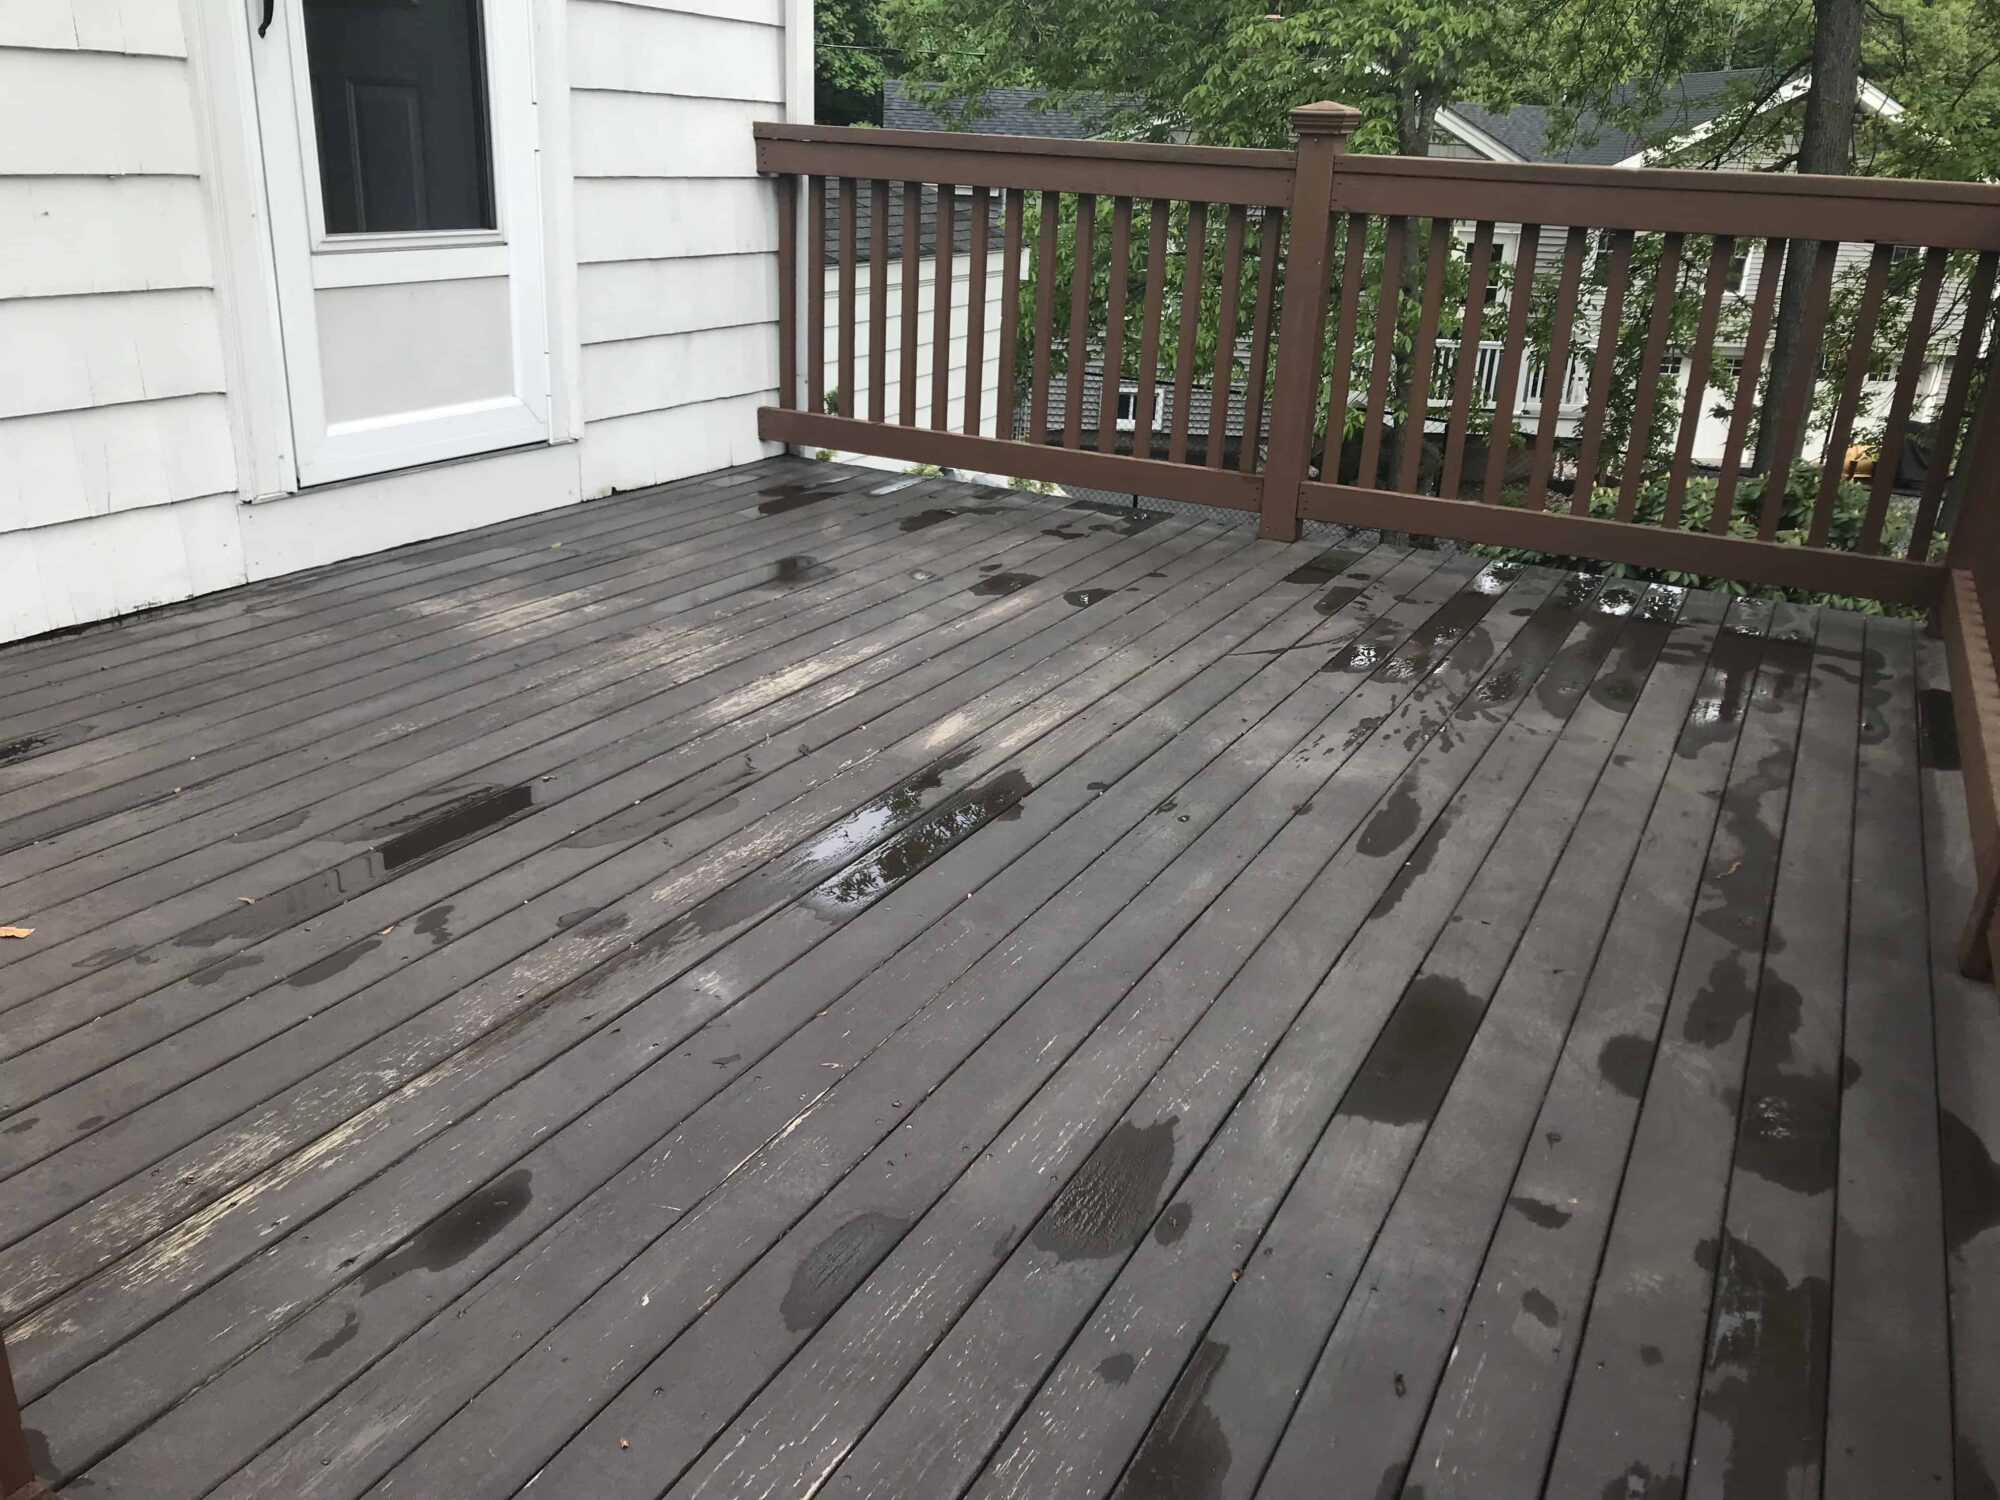 Old deck (emptied of furniture and other items) waiting to be cleaned and prepped for refinishing